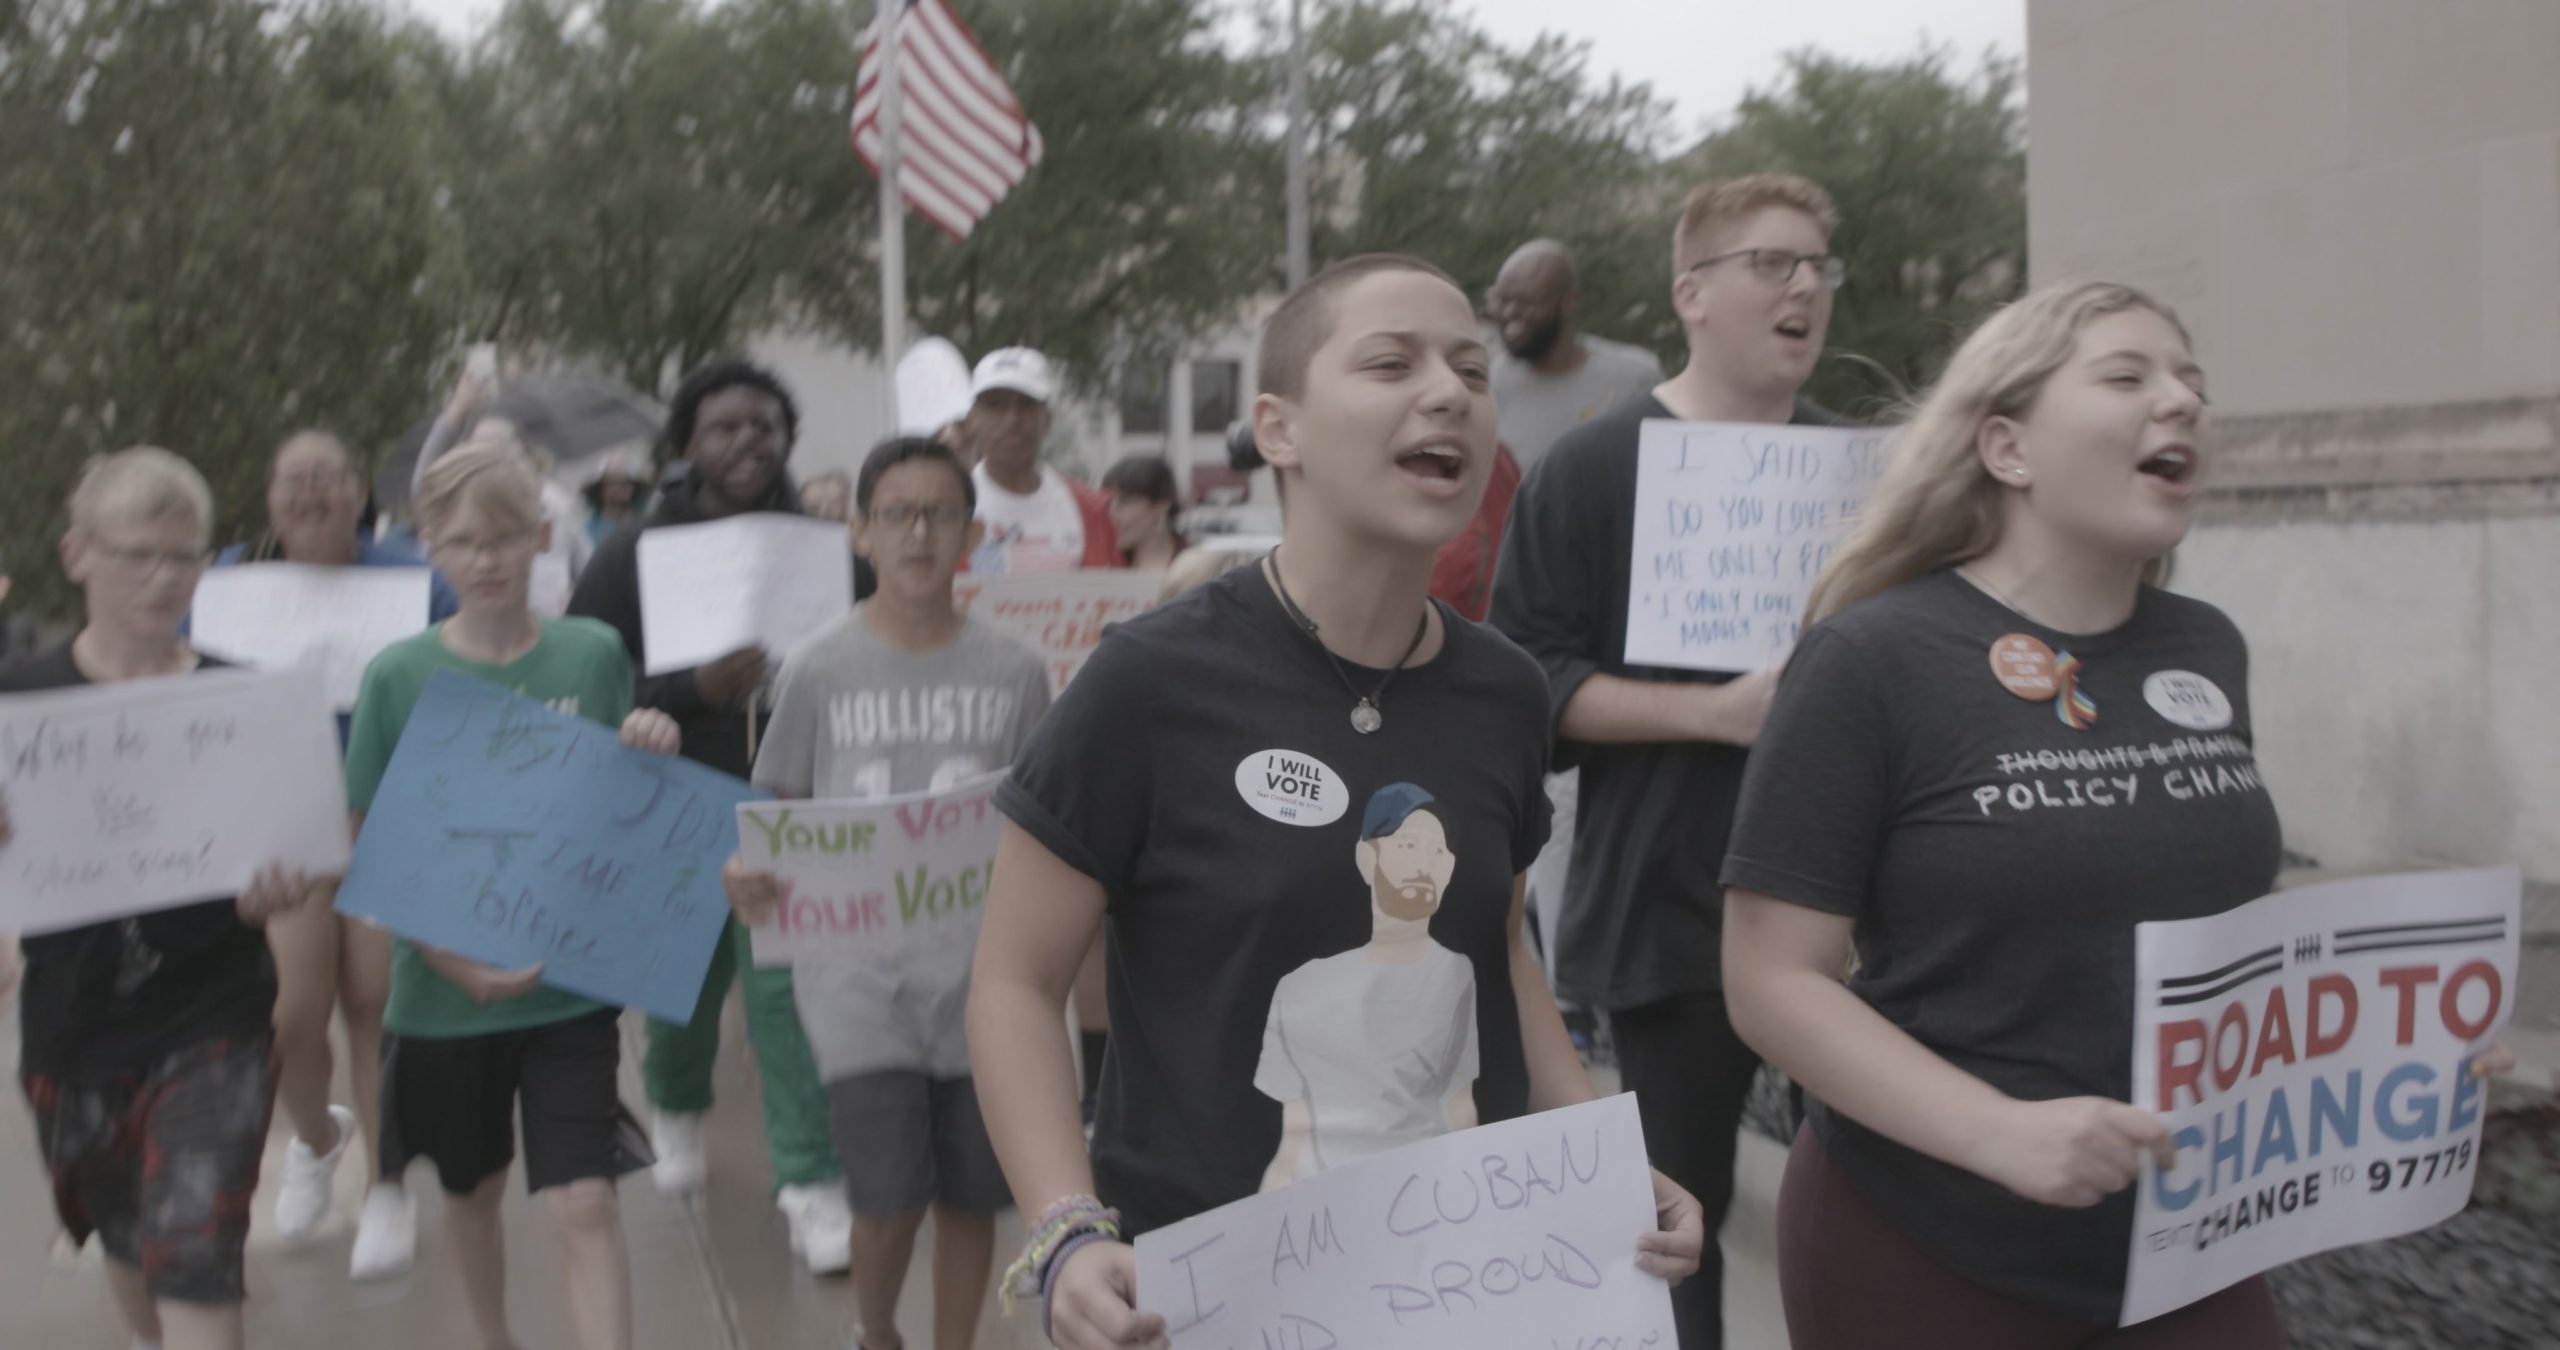 Kim A. Snyder’s March For Our Lives Doc “Us Kids” Lands at Greenwich Entertainment